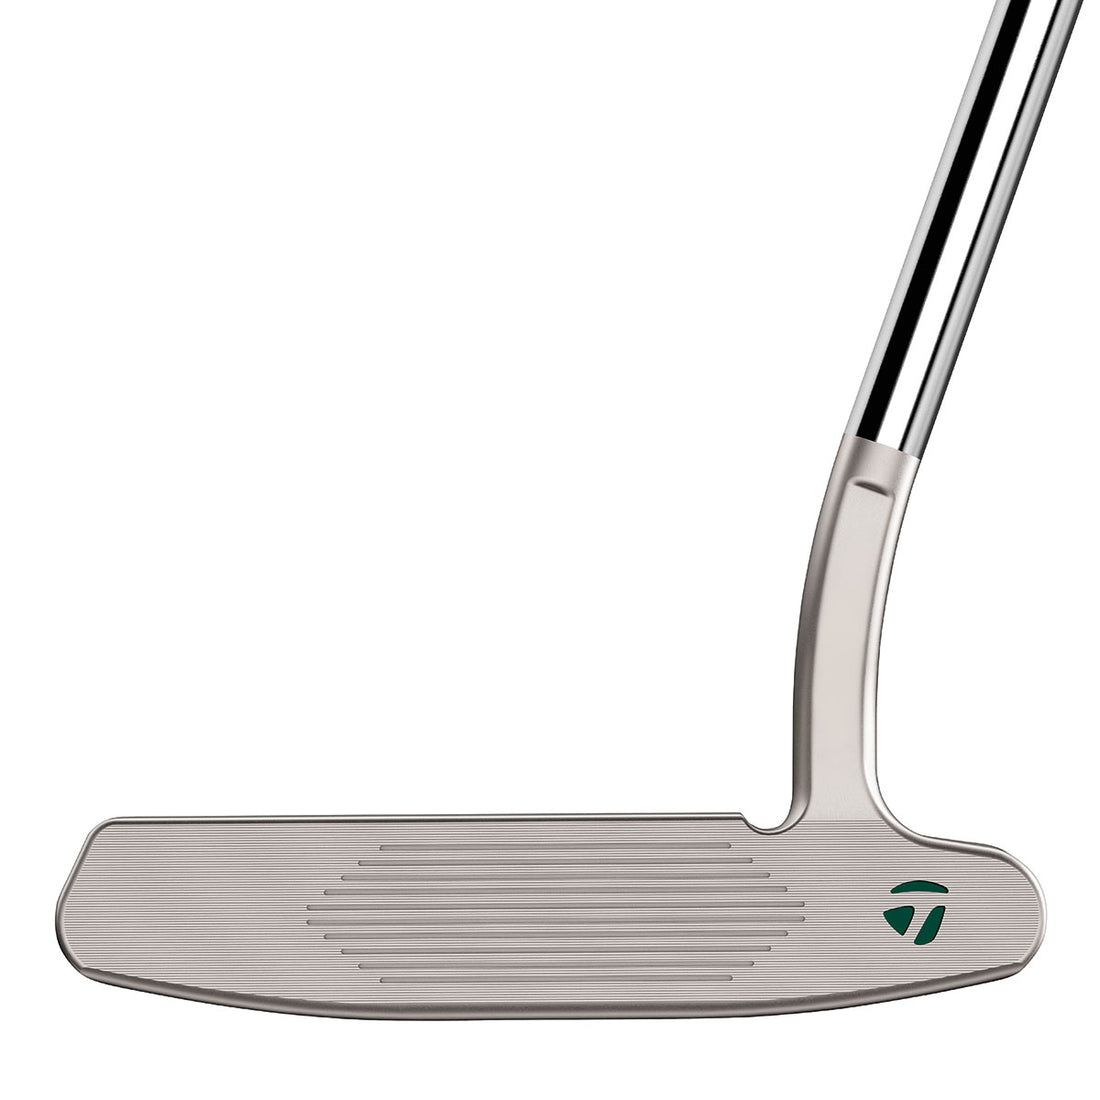 TAYLORMADE TP RESERVE B29 PUTTER